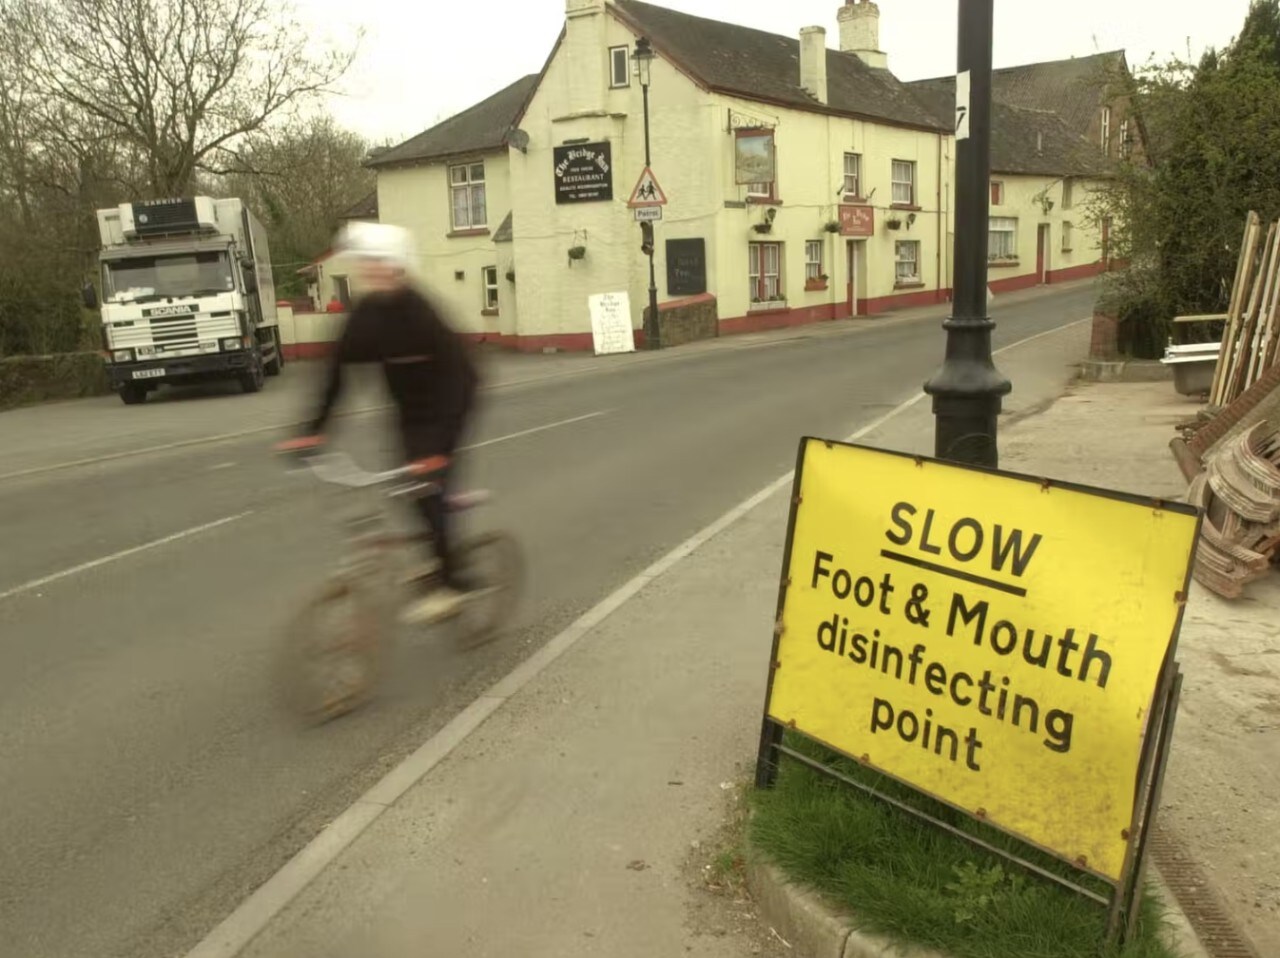 A cyclist next to a foot and mouth disease sign.